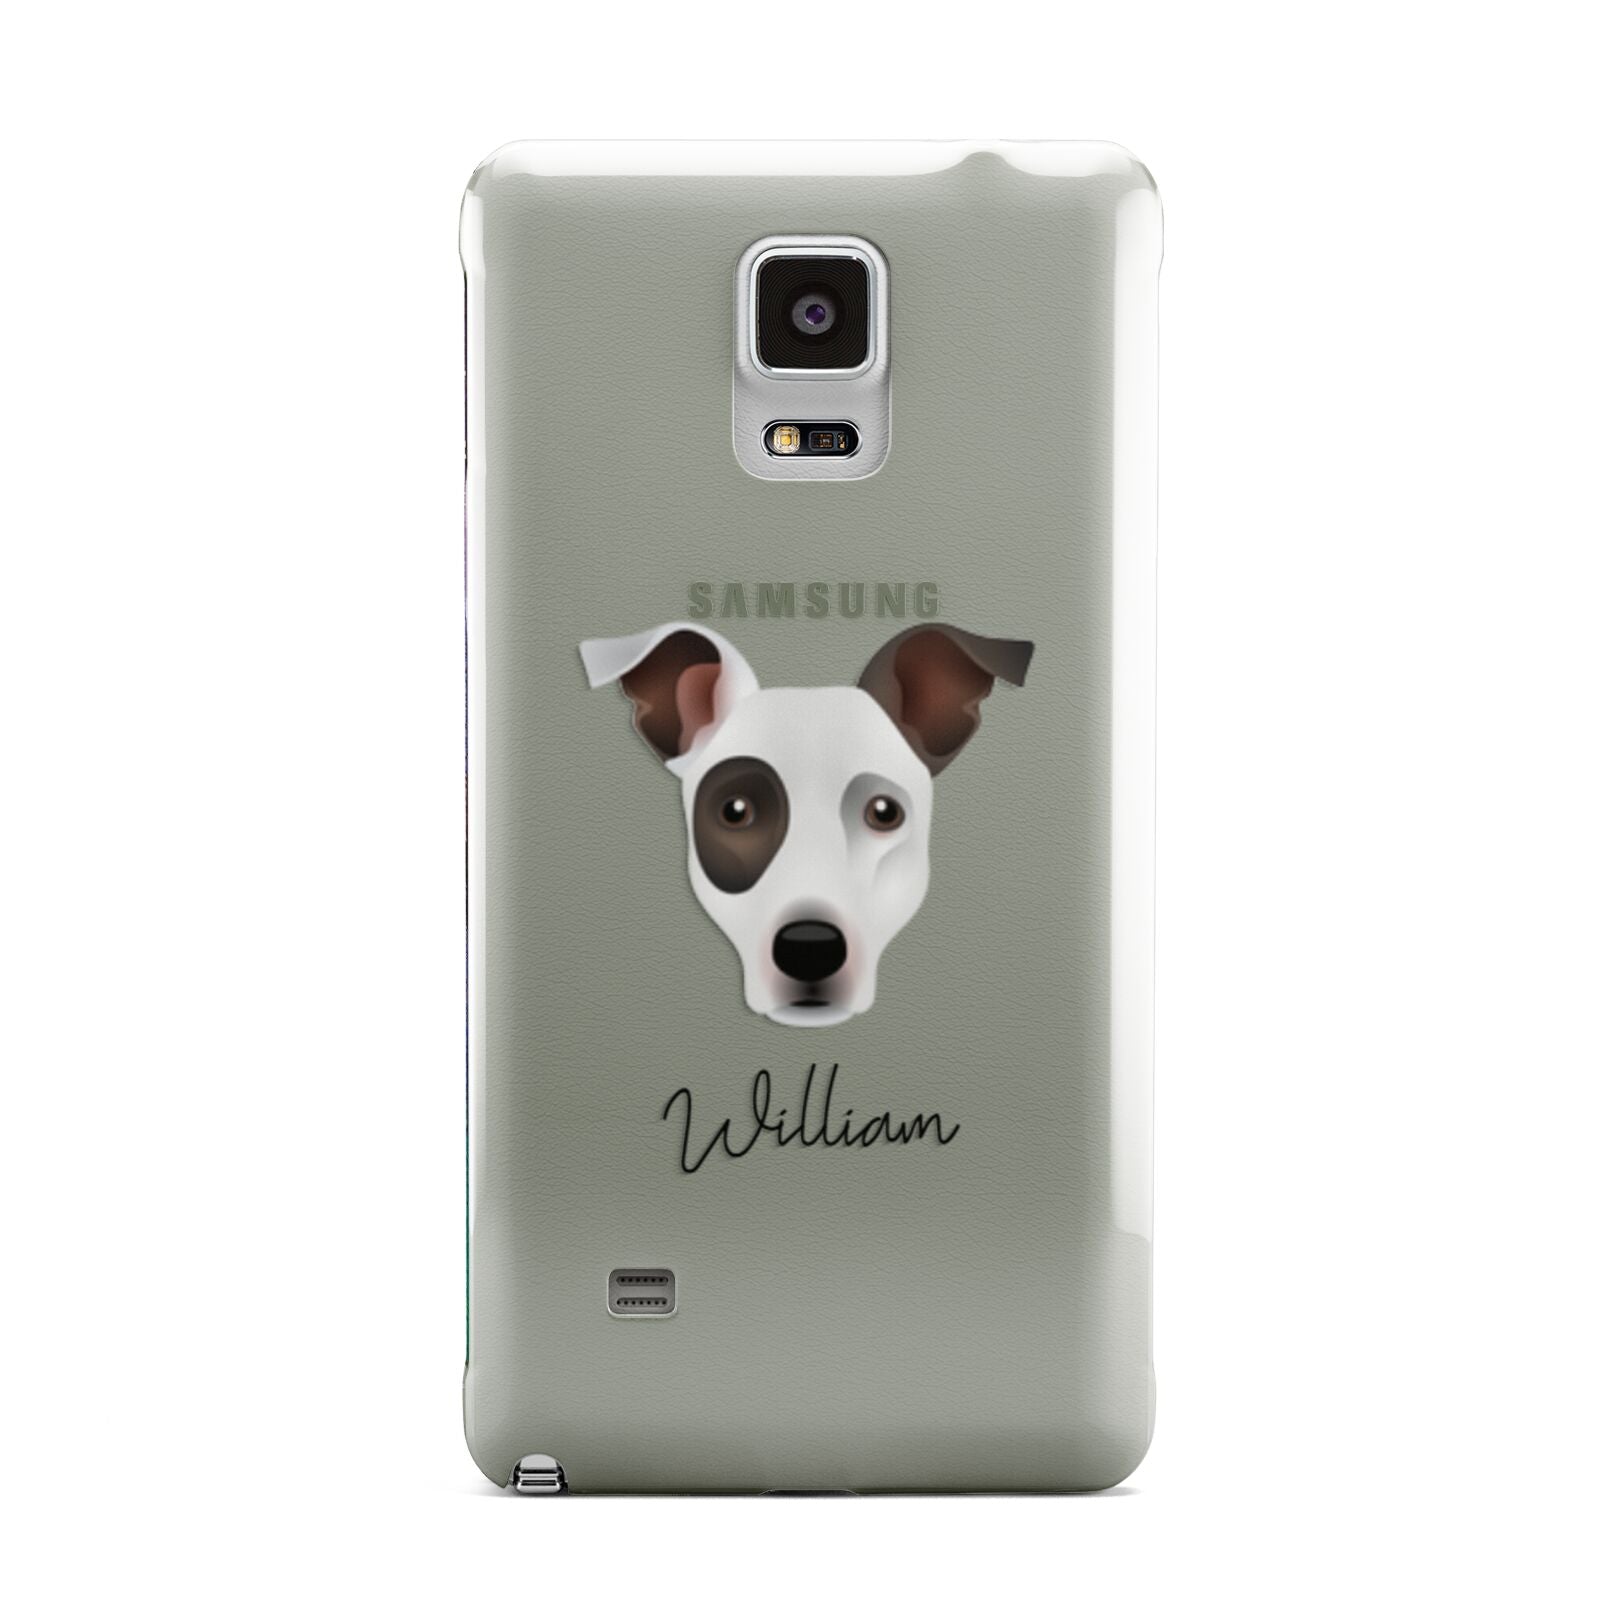 Staffy Jack Personalised Samsung Galaxy Note 4 Case